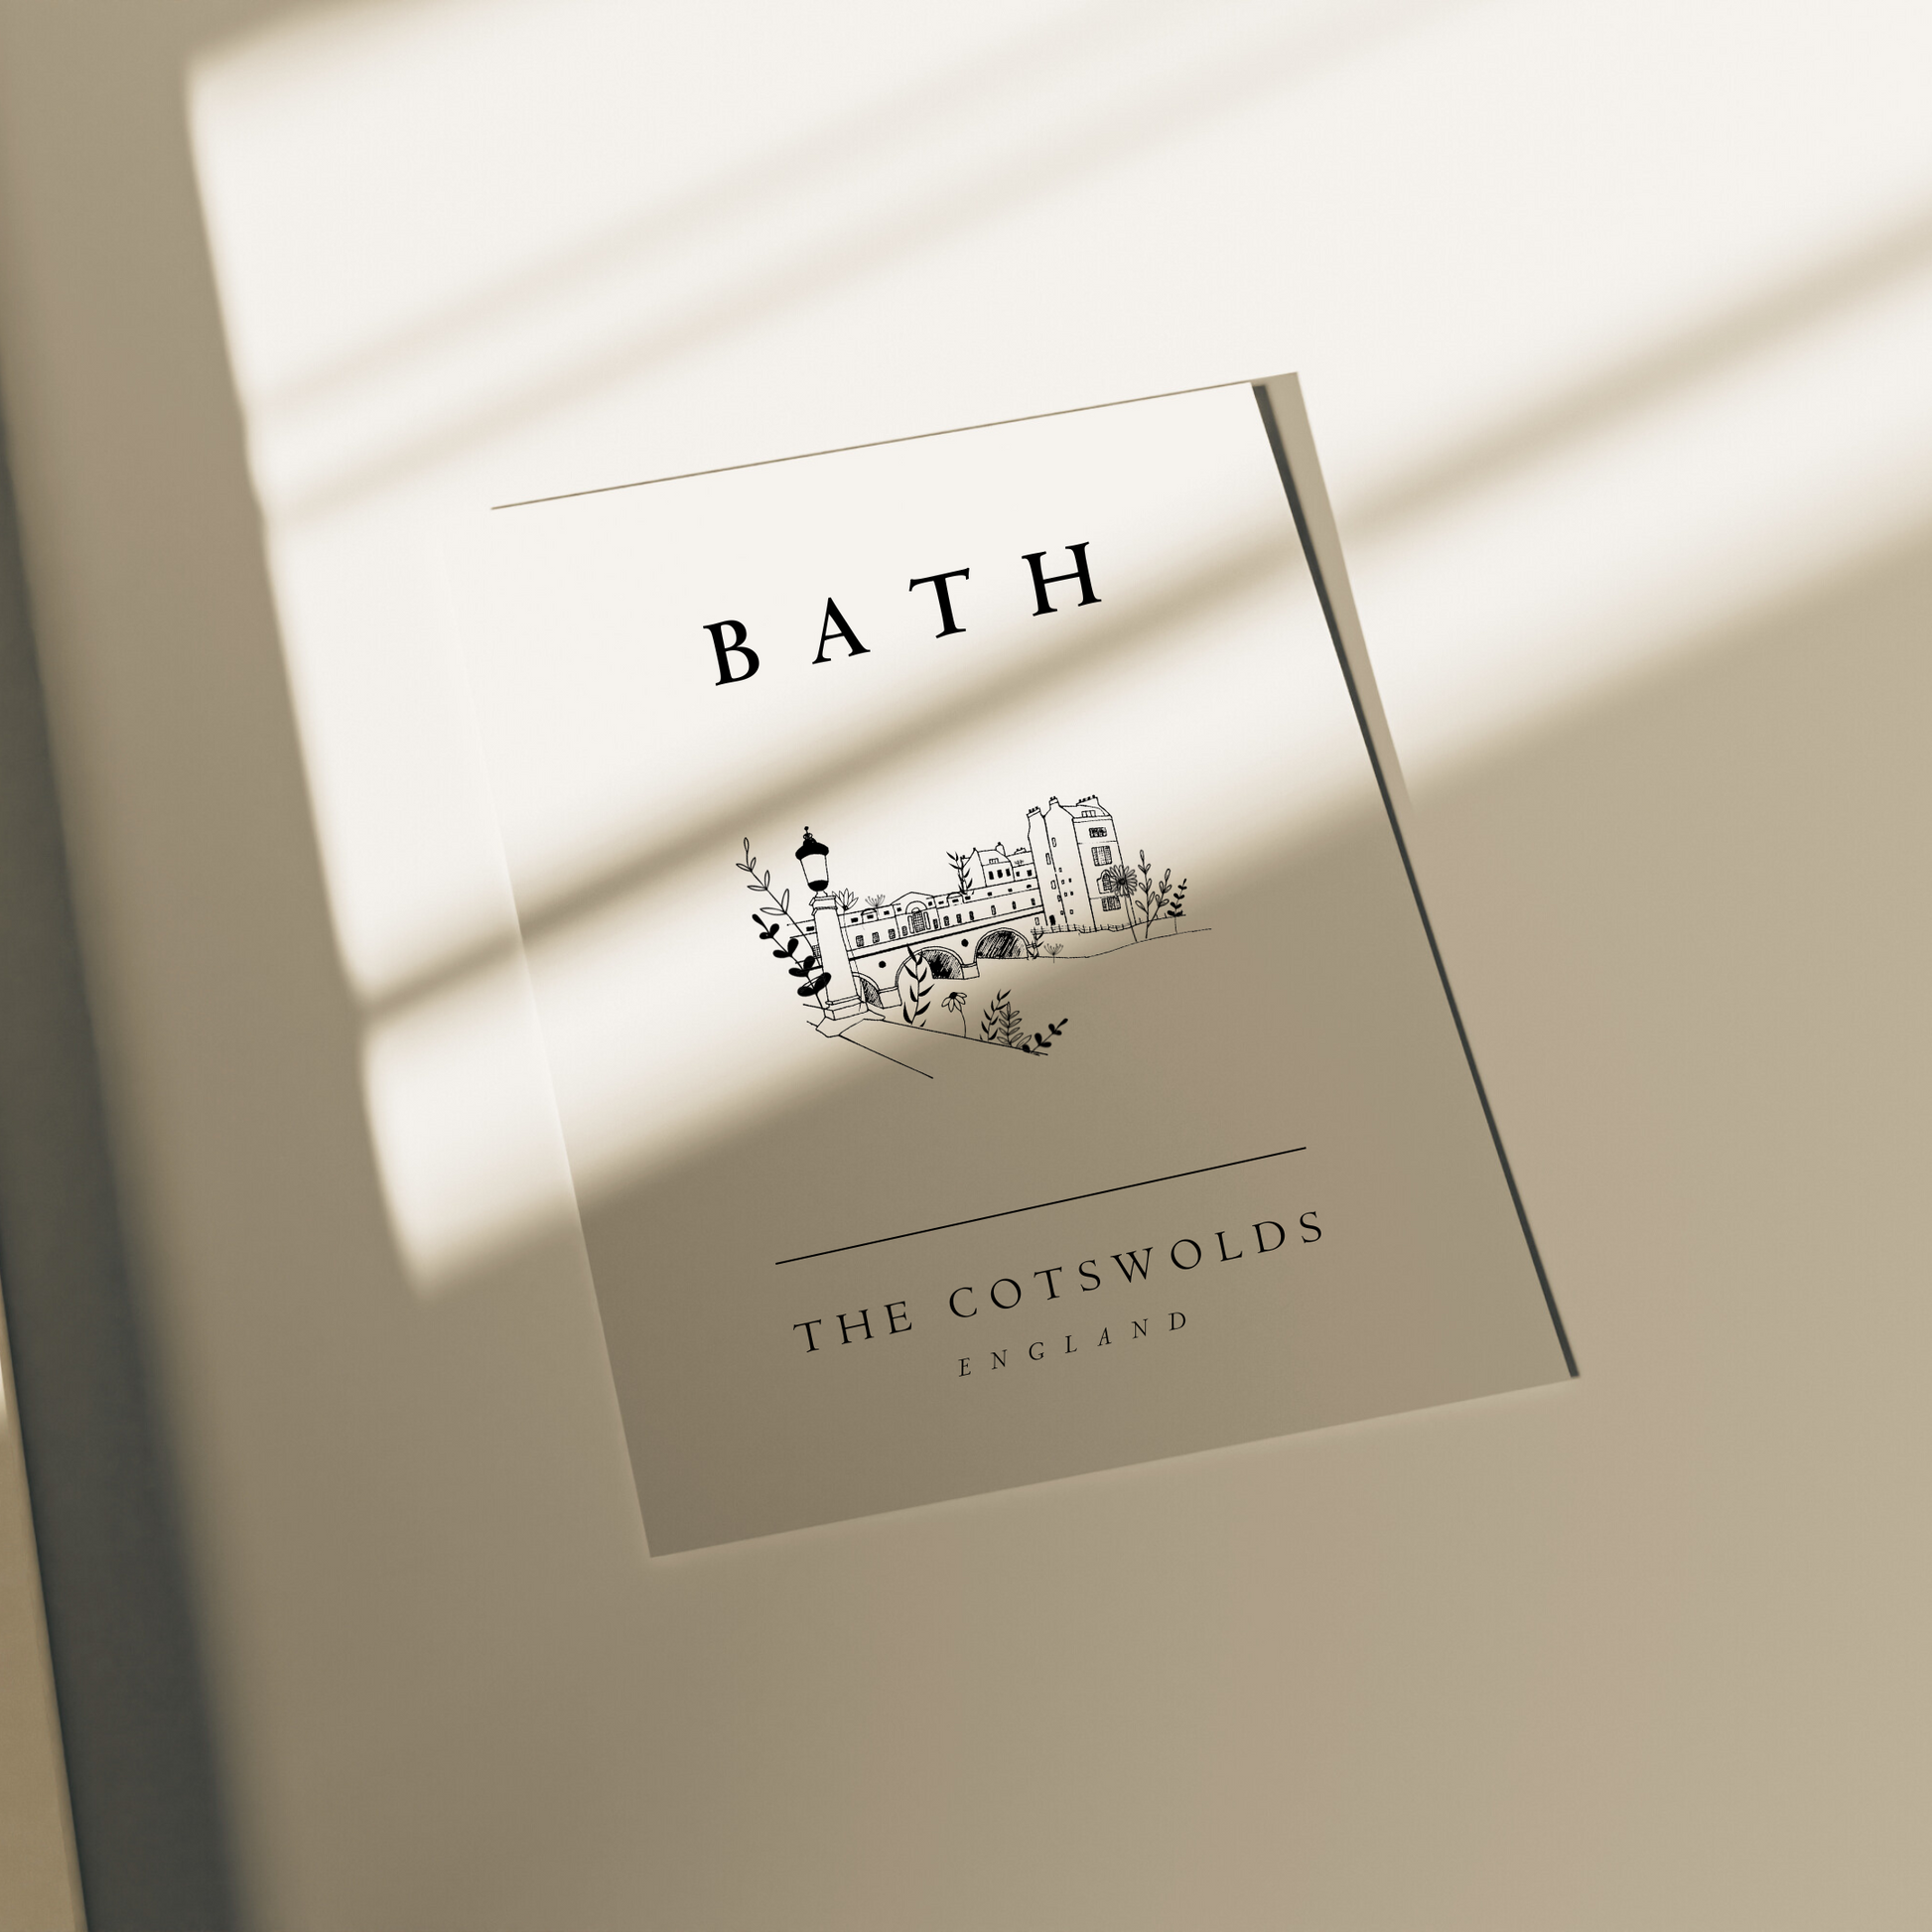 Bath | Cotswold Town Illustration | A4 Print - The Cotswold Illustrated Company